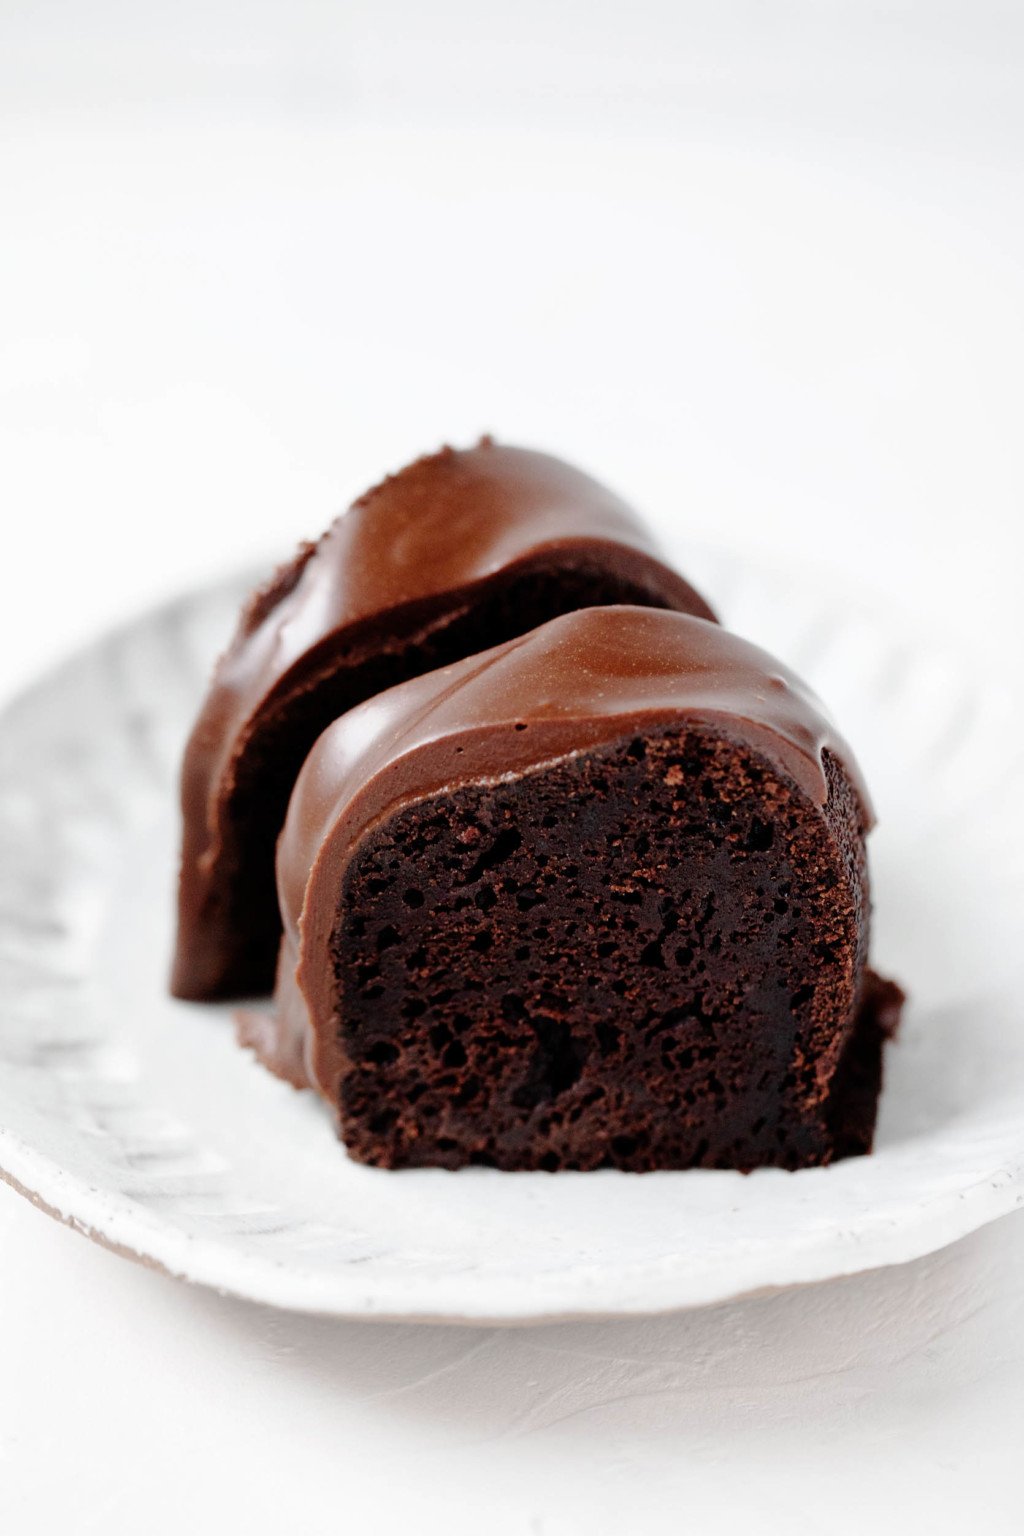 Two crosswise slices of a vegan chocolate bundt cake.